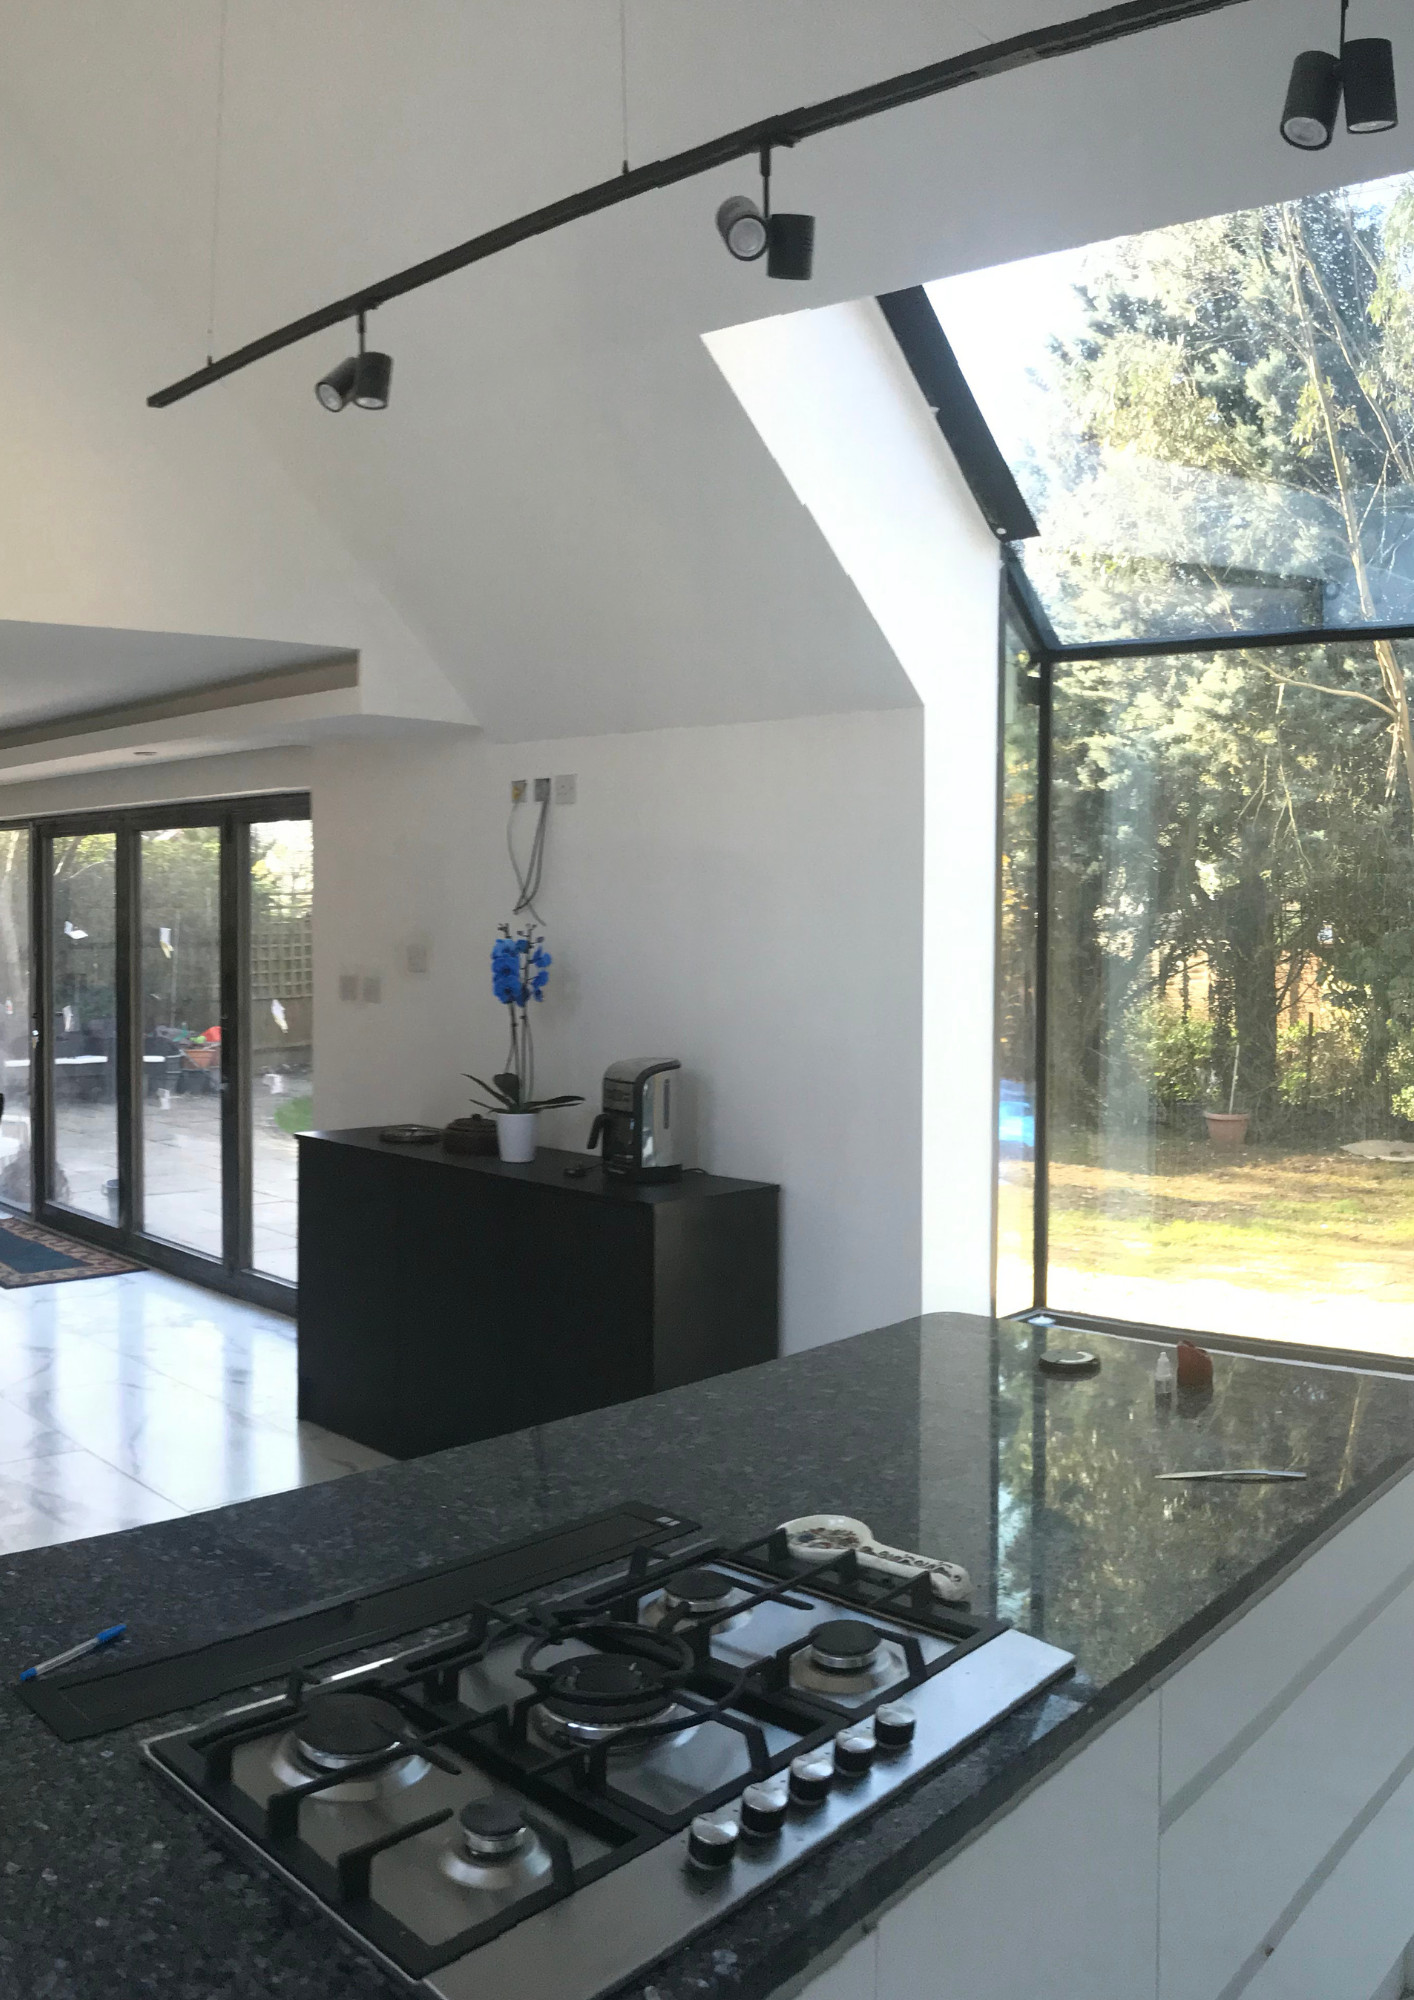 Garage conversion in a beautiful large kitchen with an oriel window towards the garden